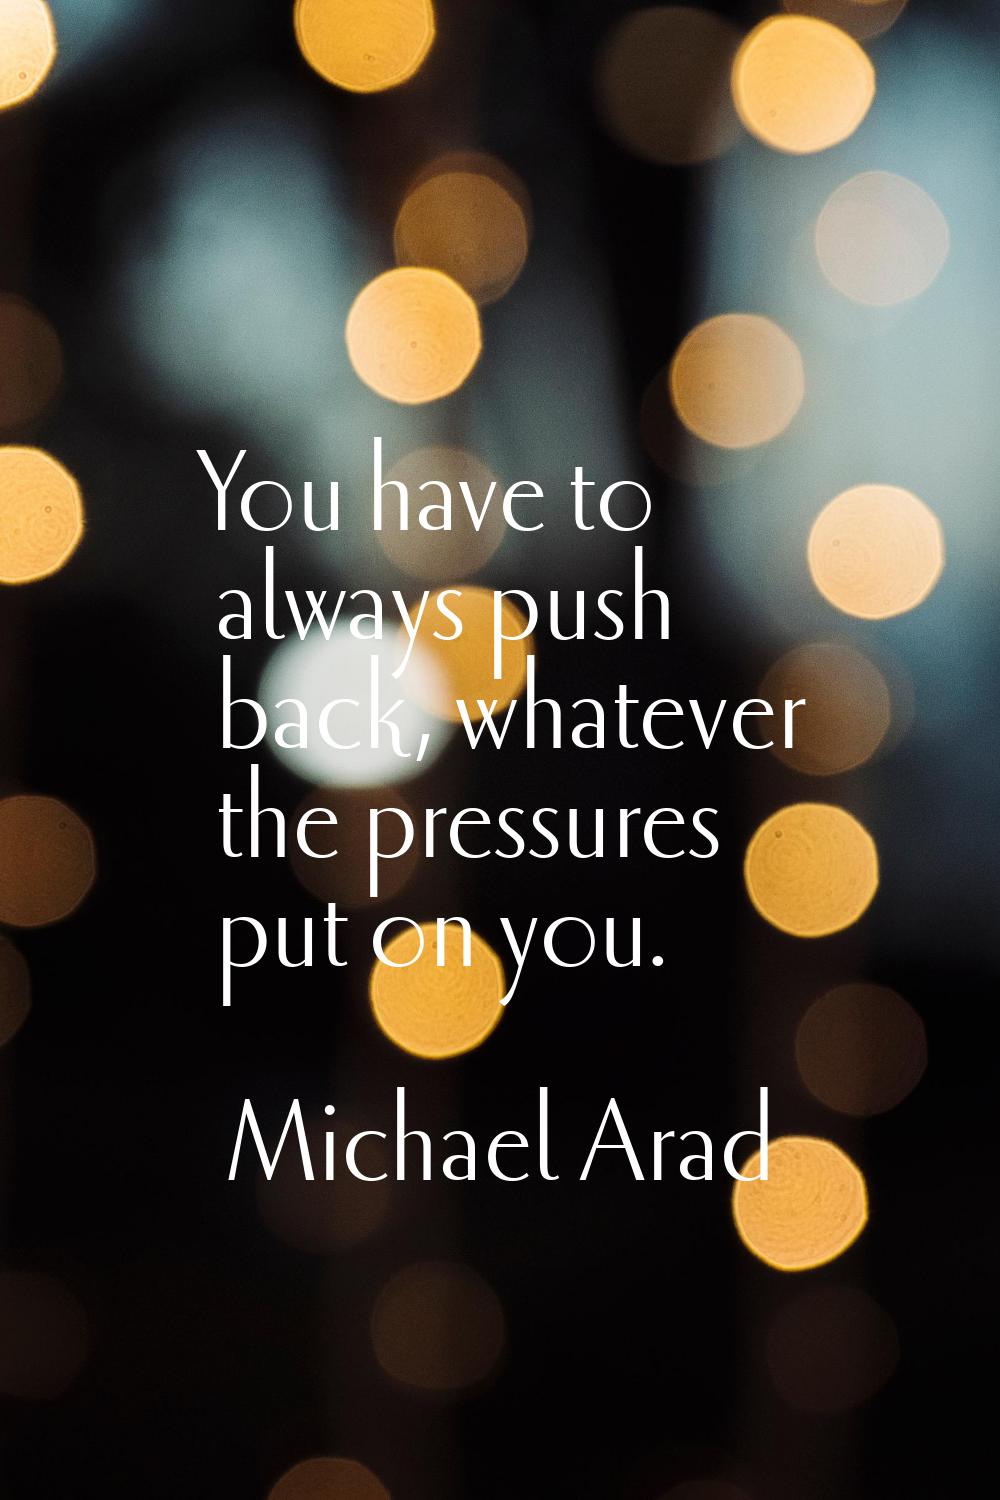 You have to always push back, whatever the pressures put on you.